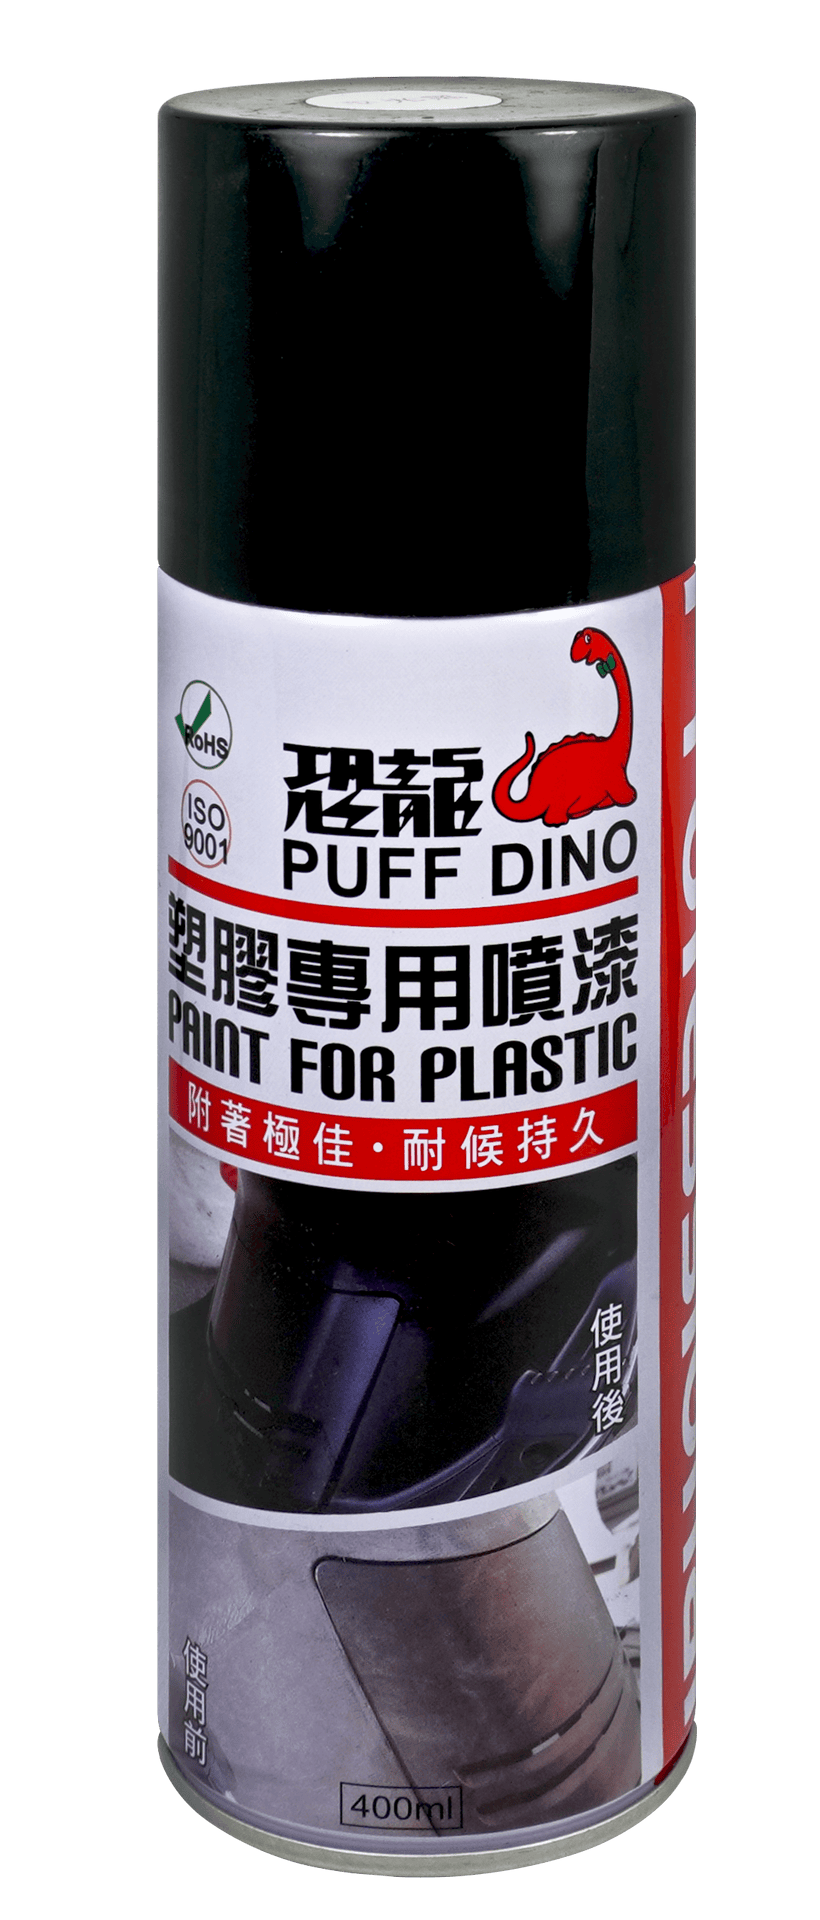 PUFF DINO SPRAY PAINT FOR PLASTIC